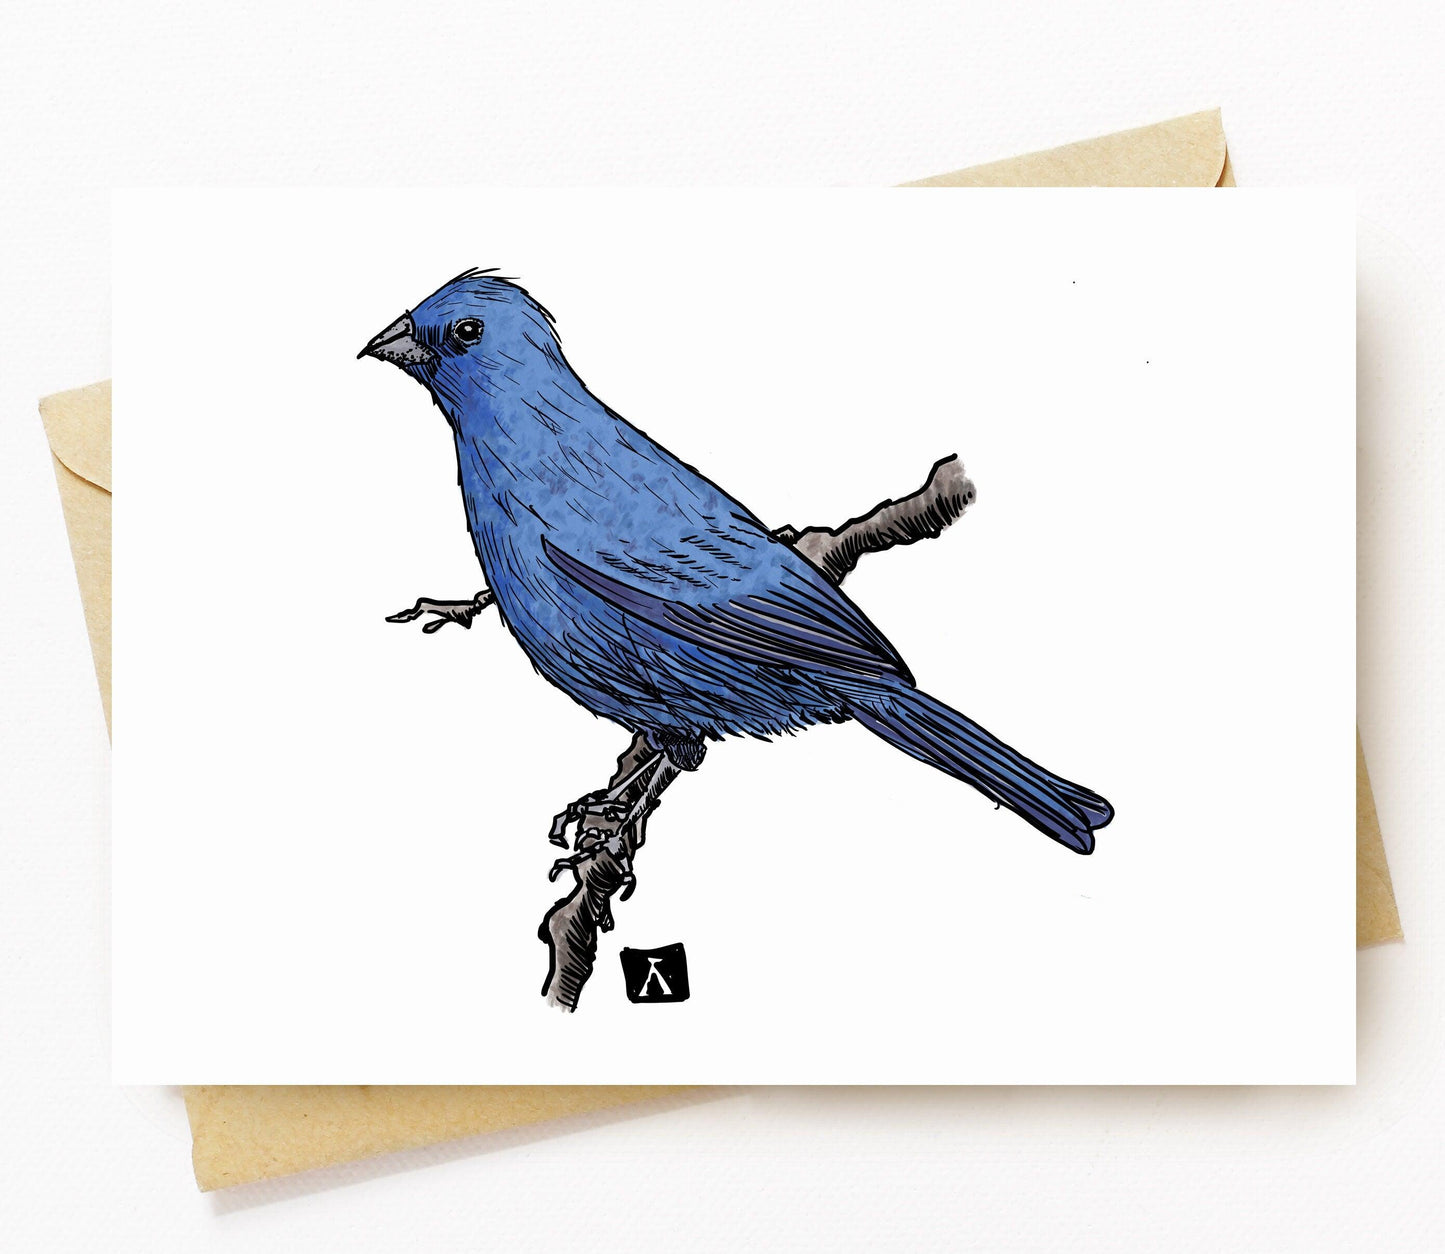 BellavanceInk: Greeting Card With Indigo Bunting On A Tree Branch Pen & Ink Watercolor Illustration 5 x 7 Inches - BellavanceInk